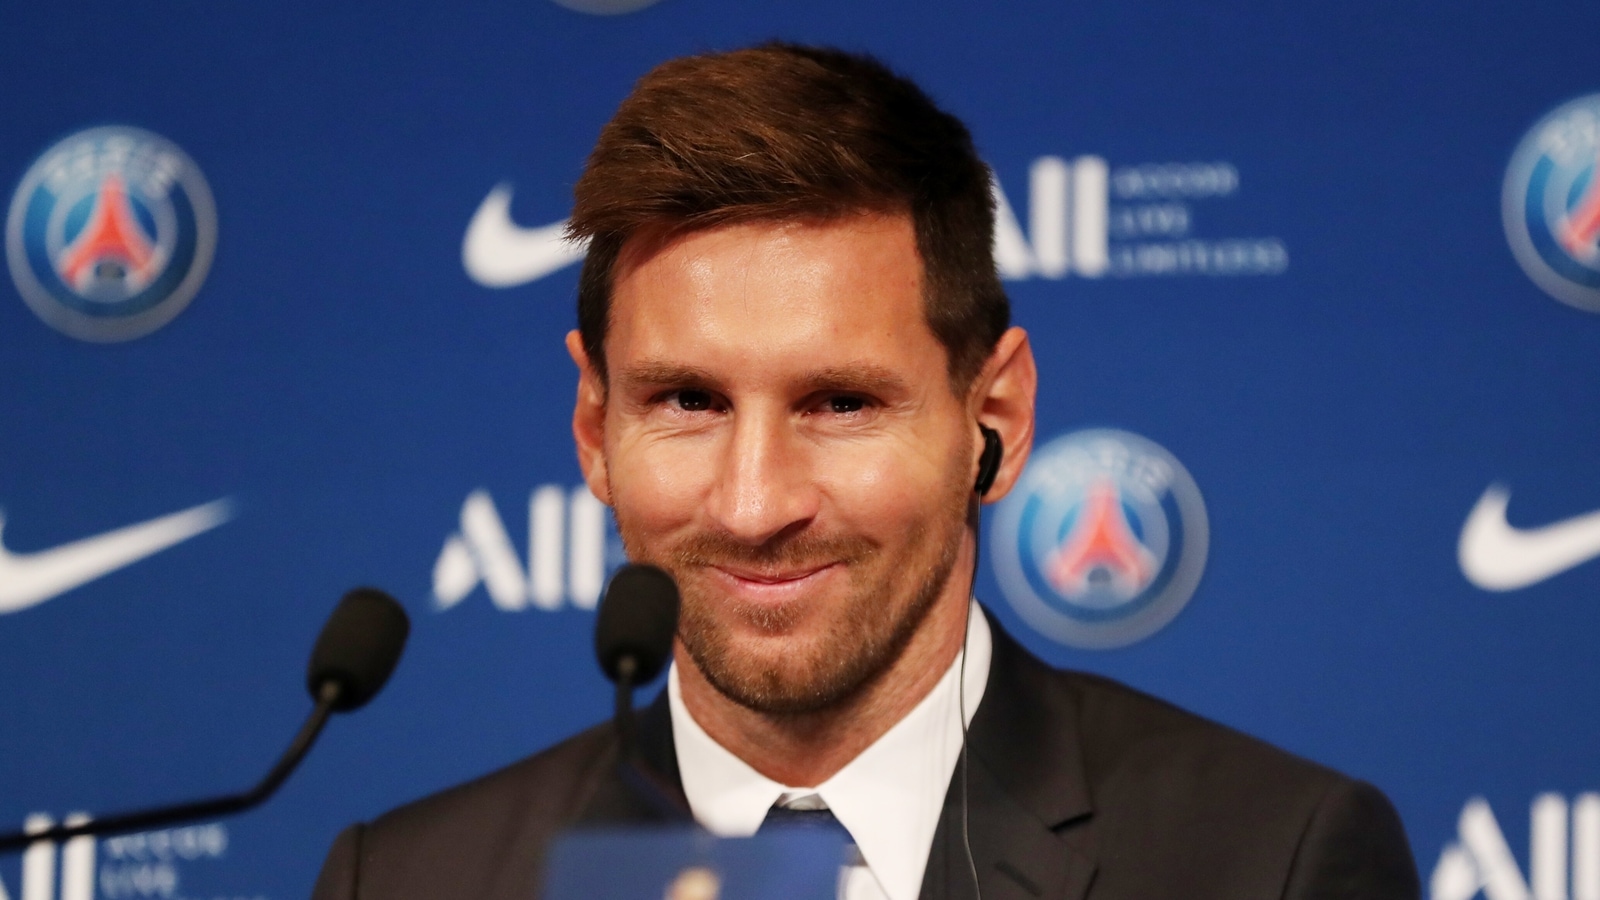 Lionel Messi's Twitch app interview shows how social media is